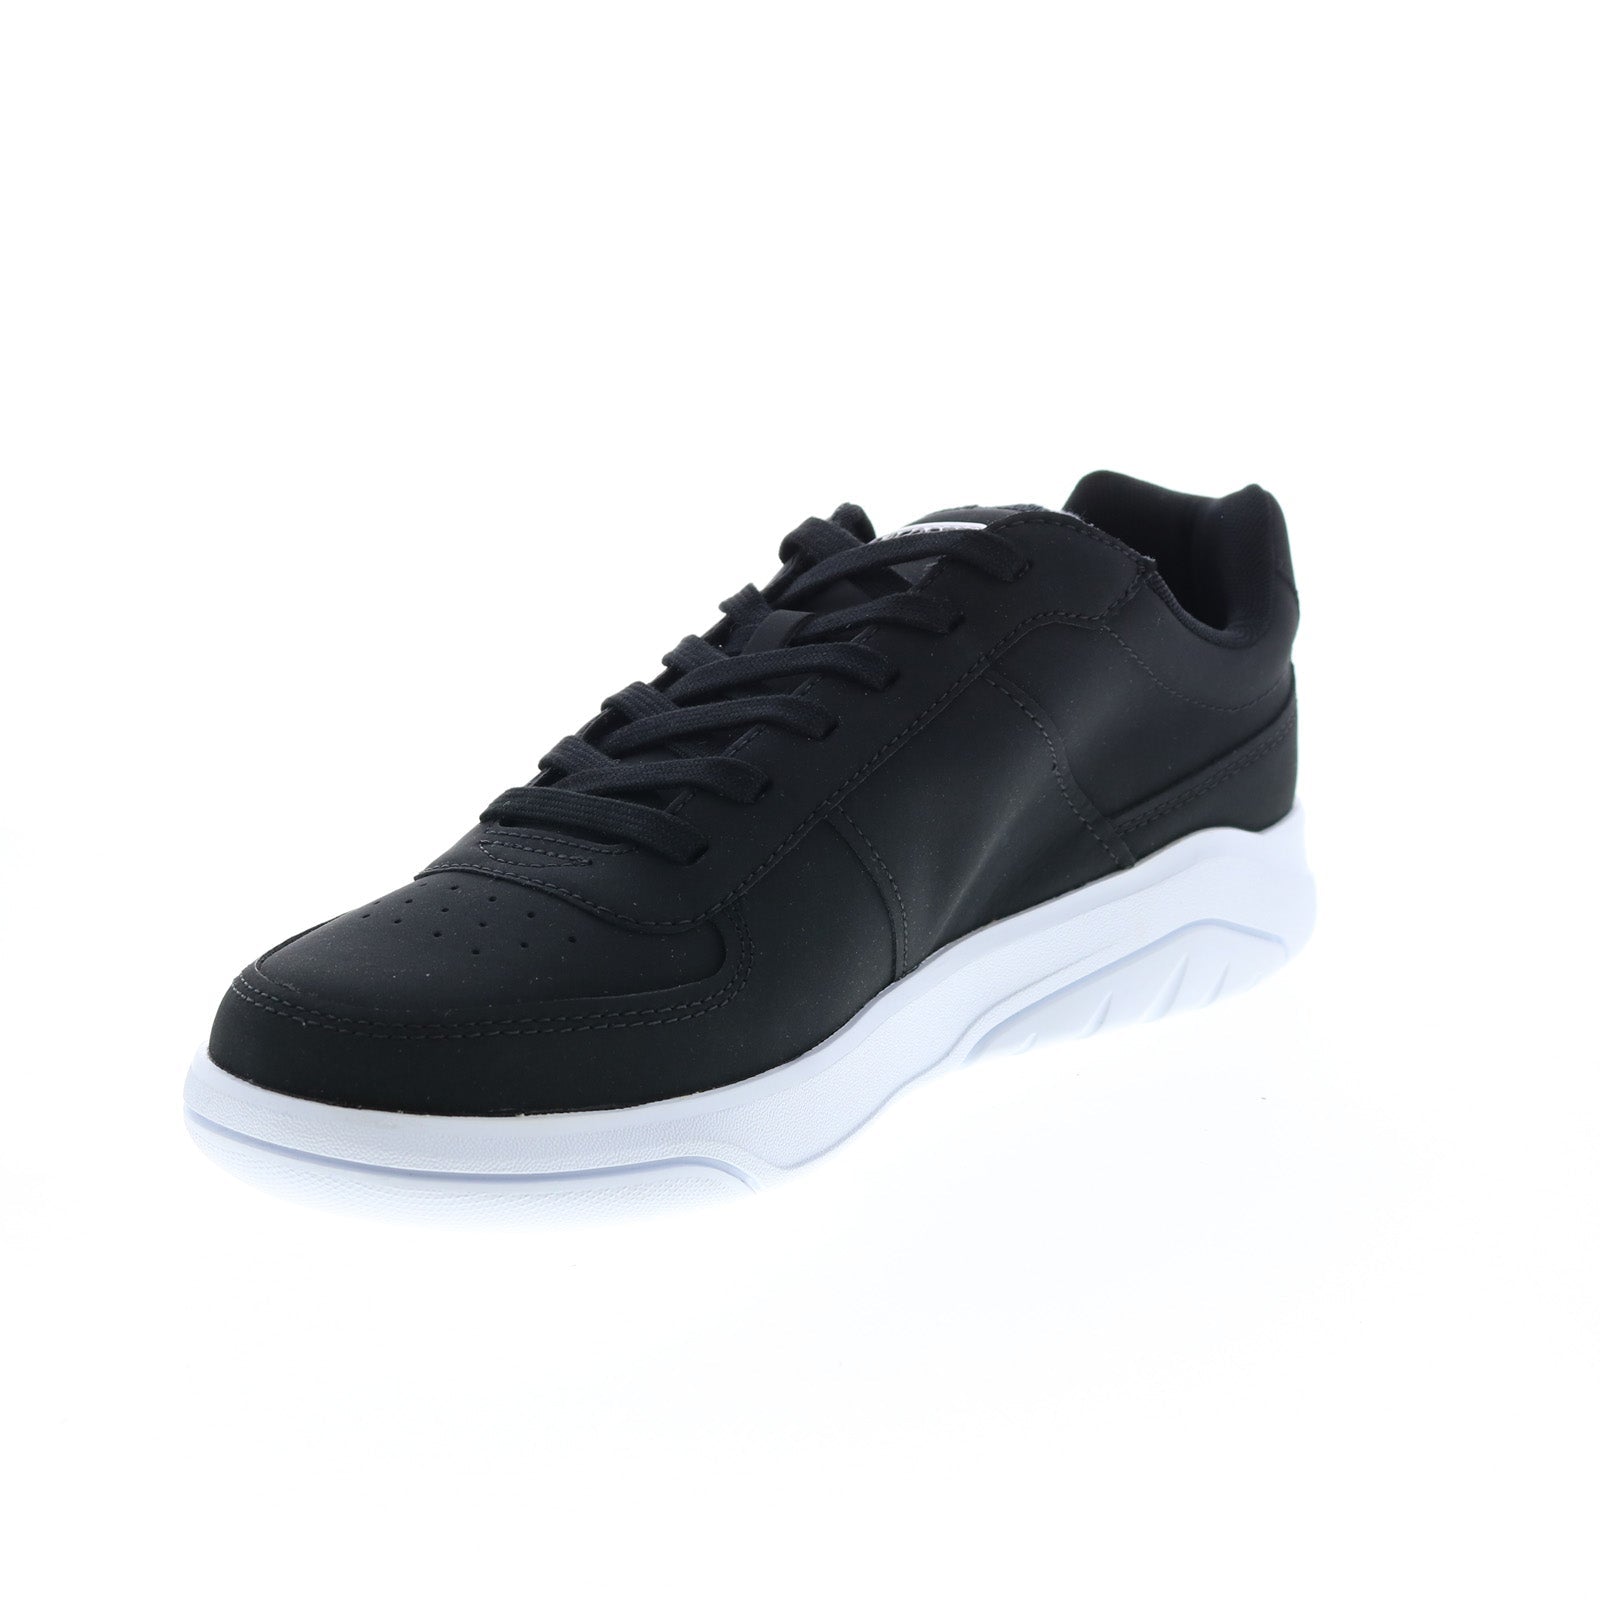 Lacoste Game Advance Trainers in Black for Men